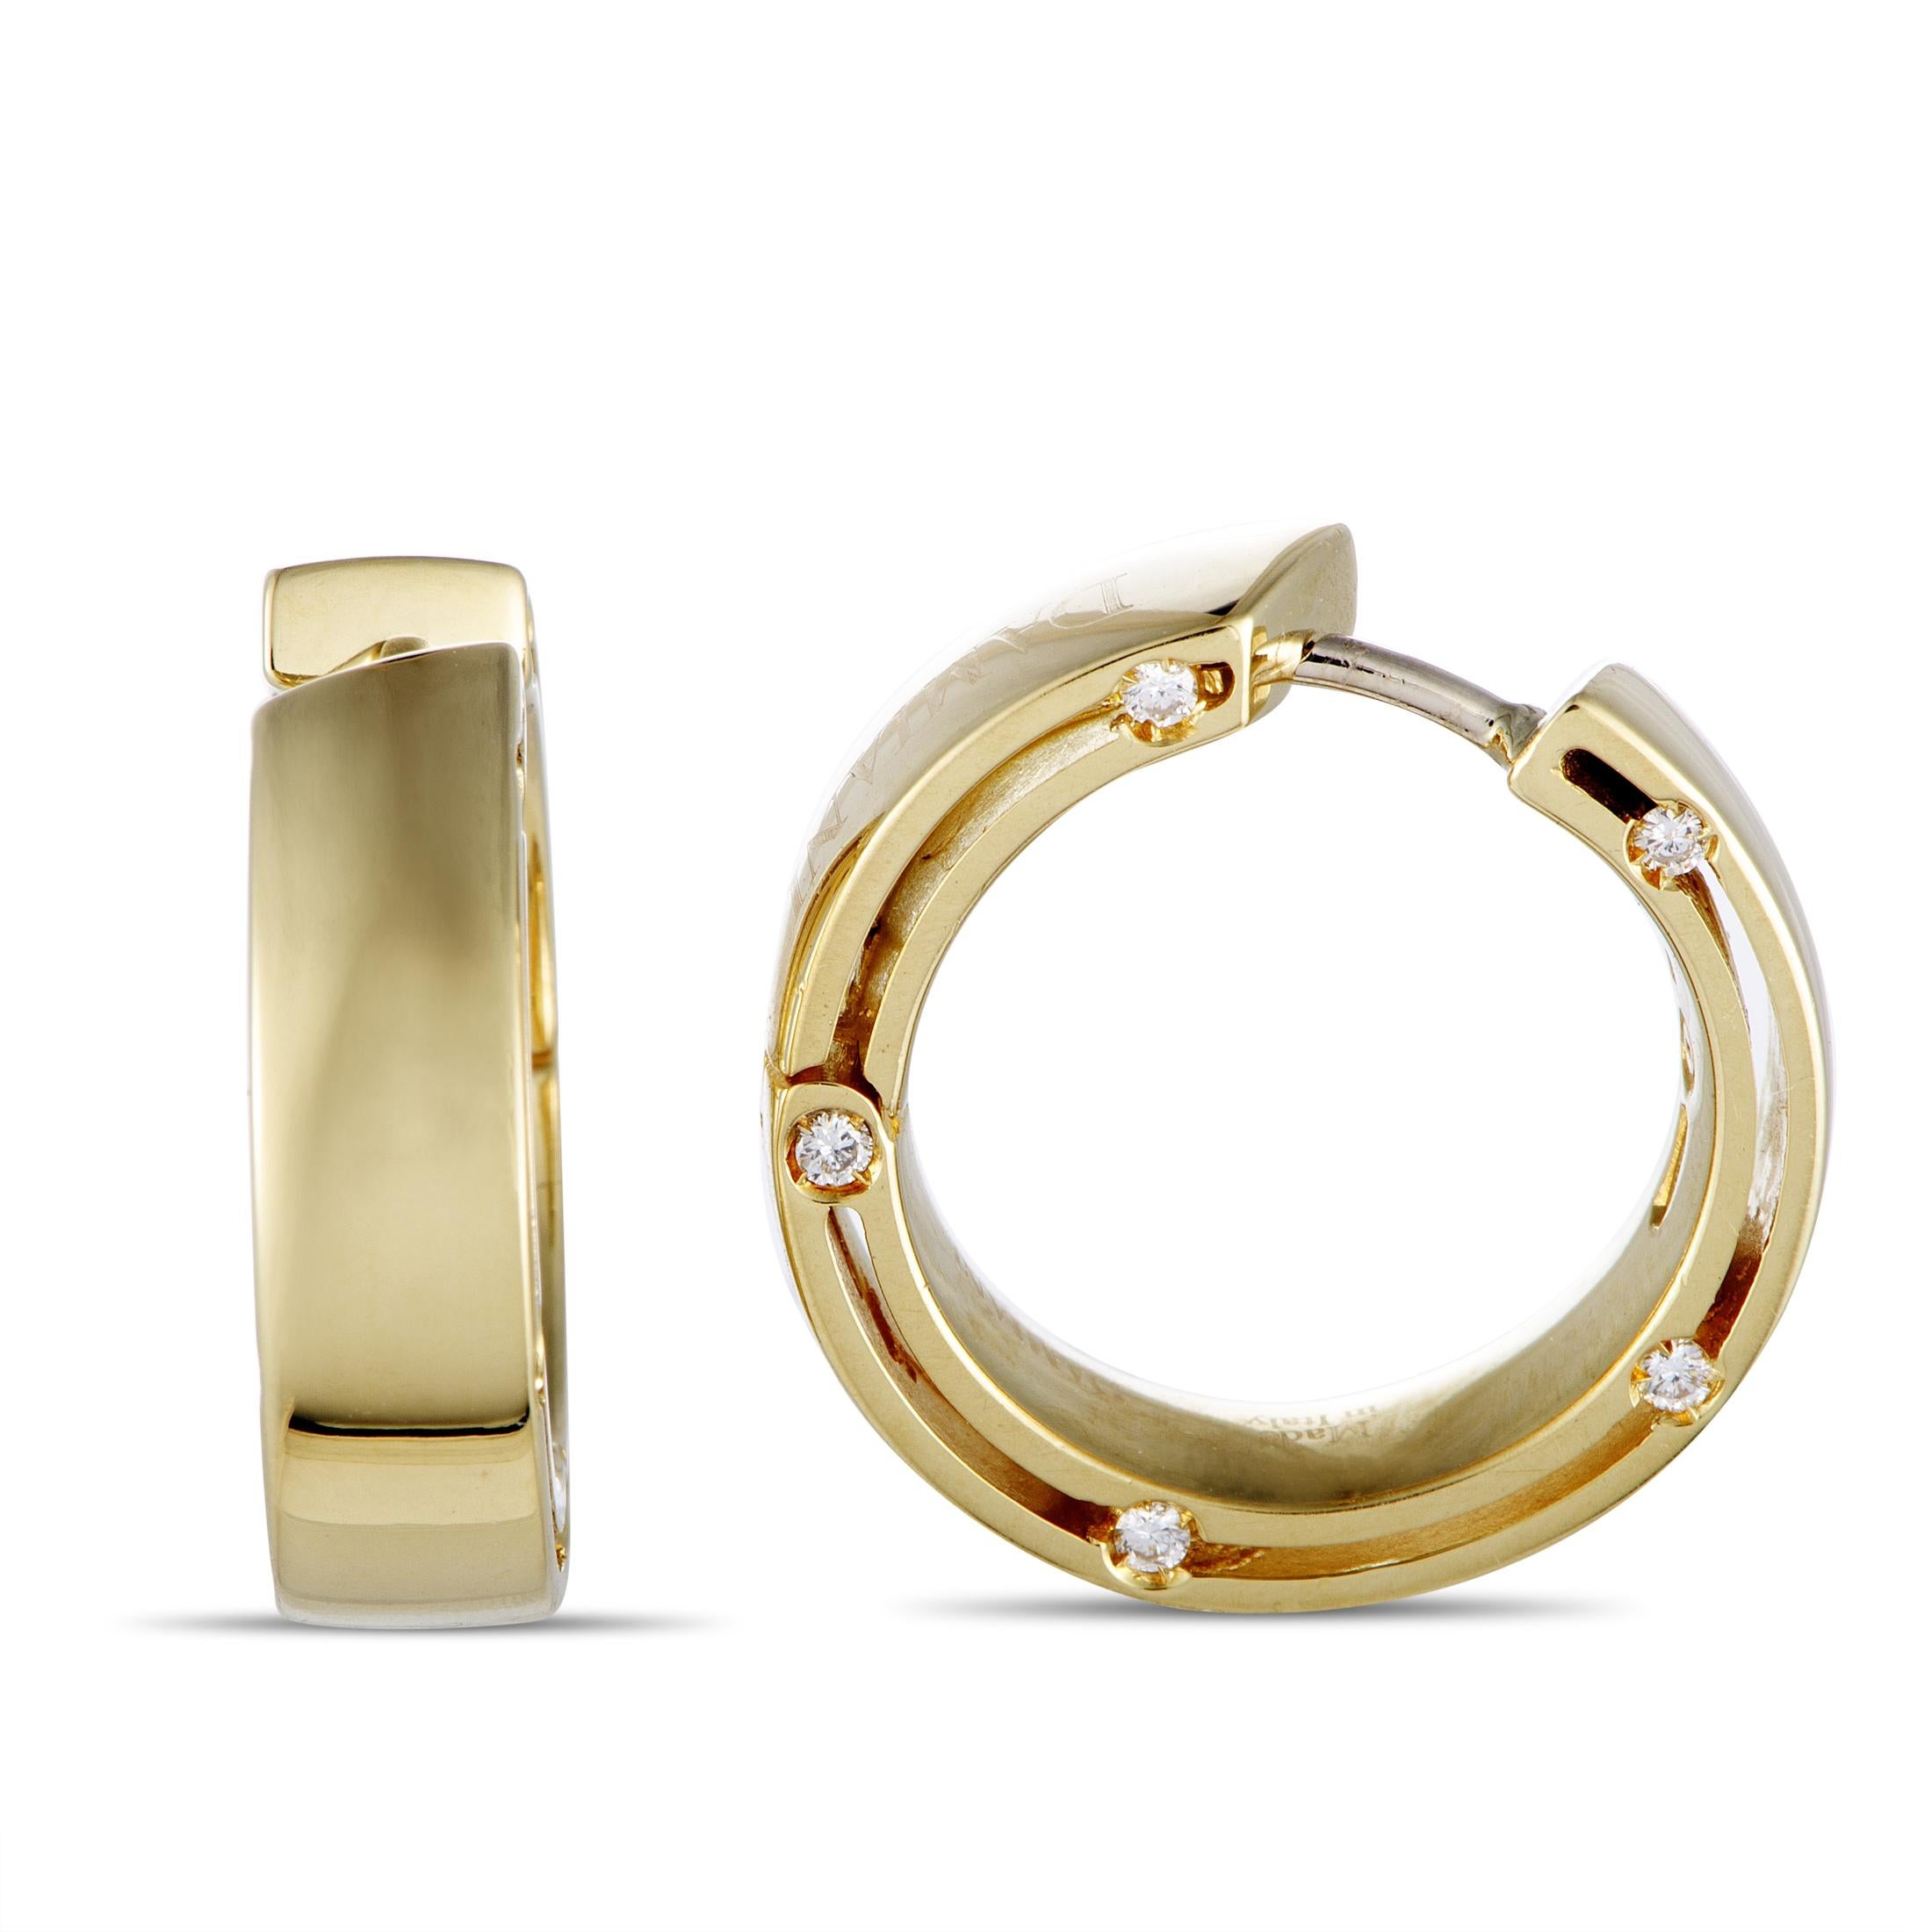 The Damiani “D.Side” earrings are crafted from 18K yellow gold and set with diamonds that weigh 0.16 carats in total. The earrings measure 0.65” in length and 0.25” in width, and each of the two weighs 5.15 grams.
 
 This pair of earrings is